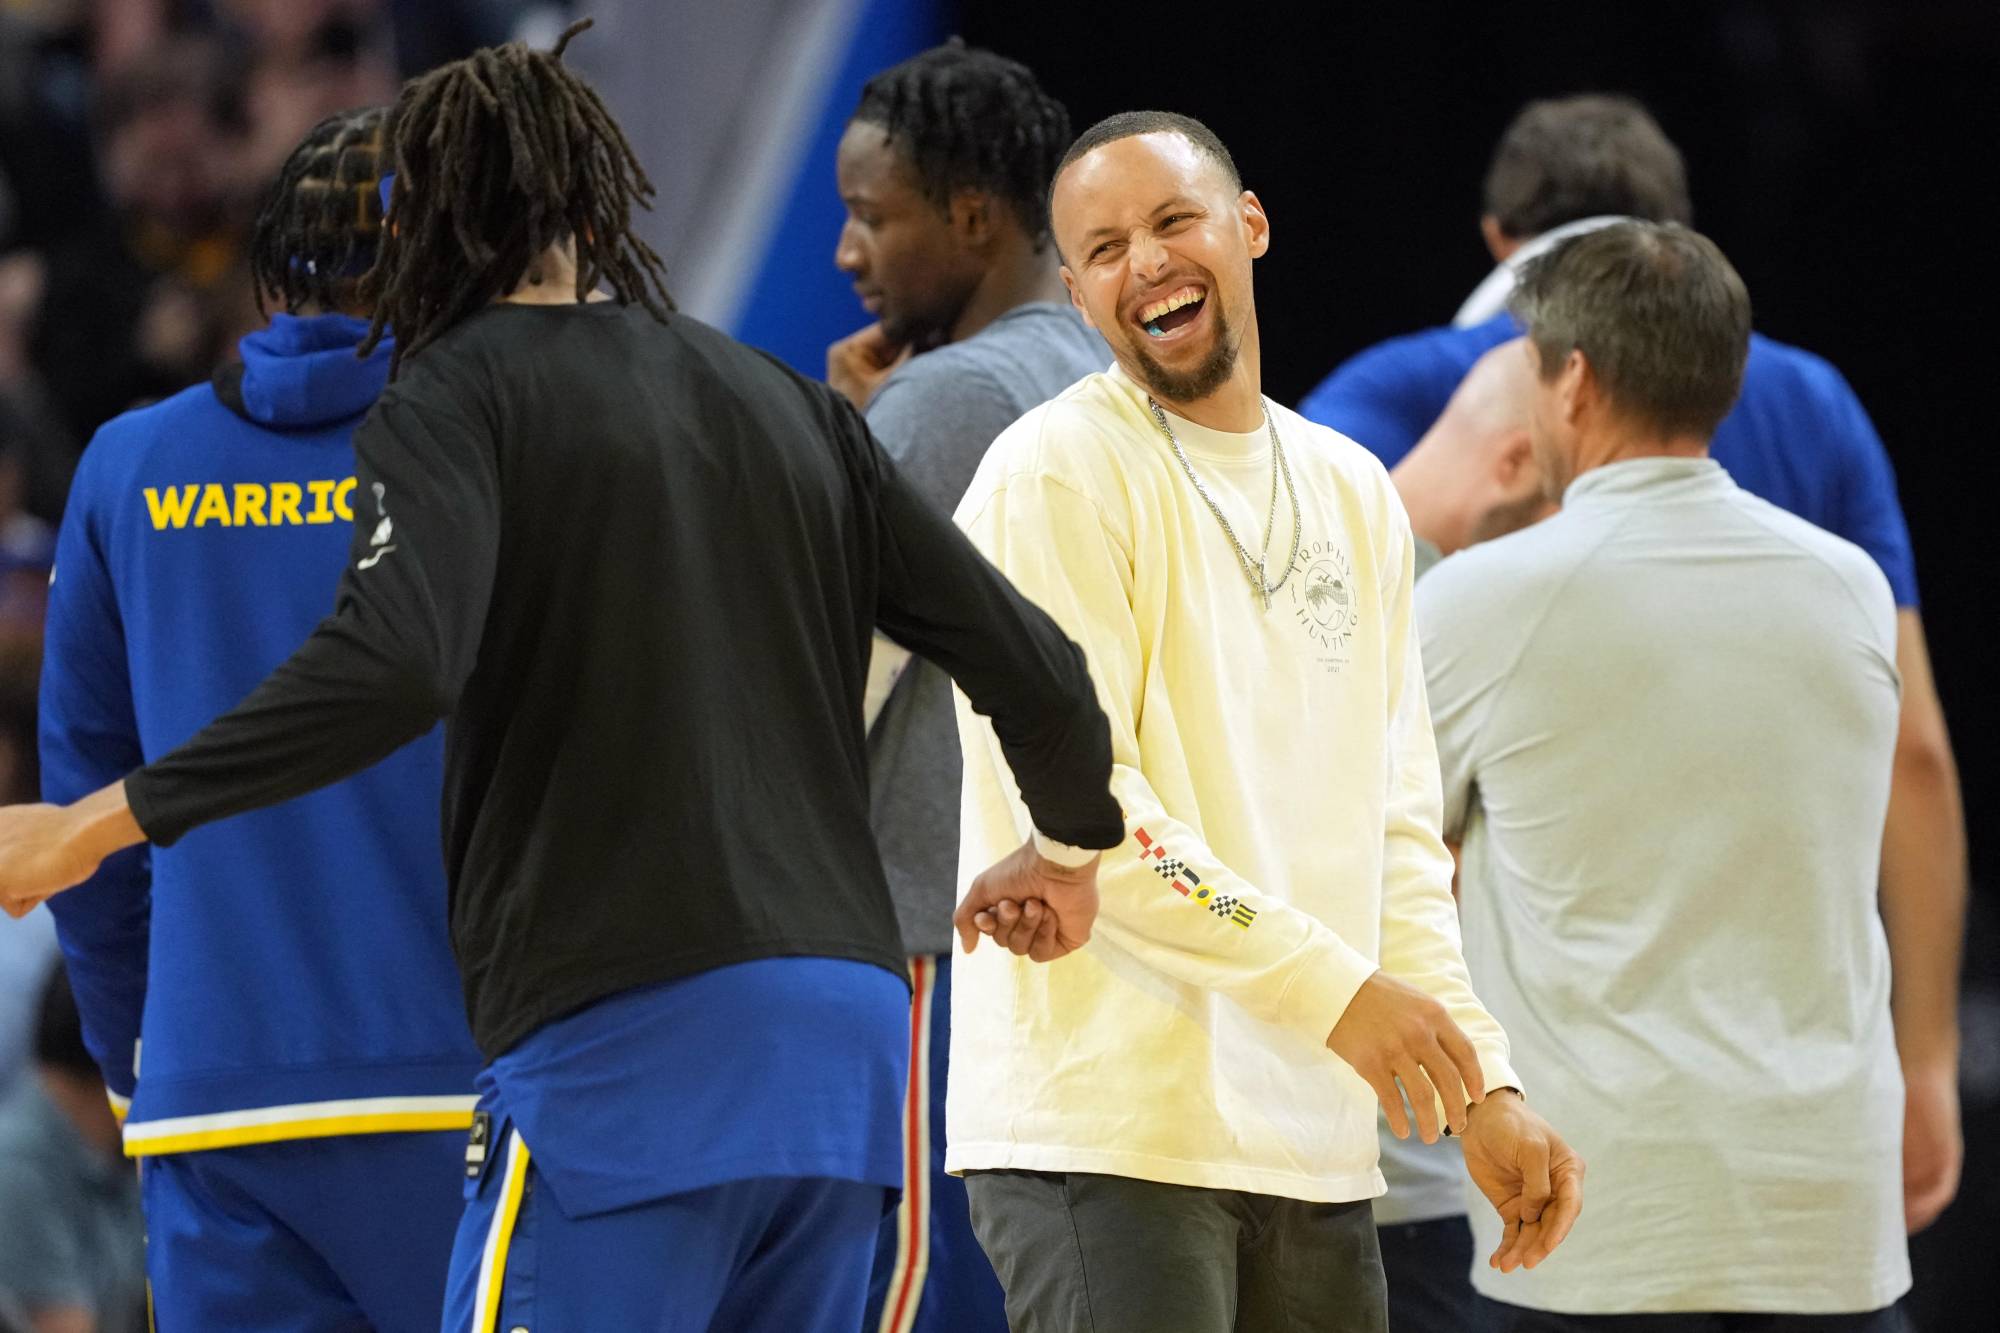 Inspiredlovers AAA After Using Abusive Language on Camera, Stephen Curry Once Faced Revolt From His Own Family NBA Sports  Warriors Stephen Curry NBA News 